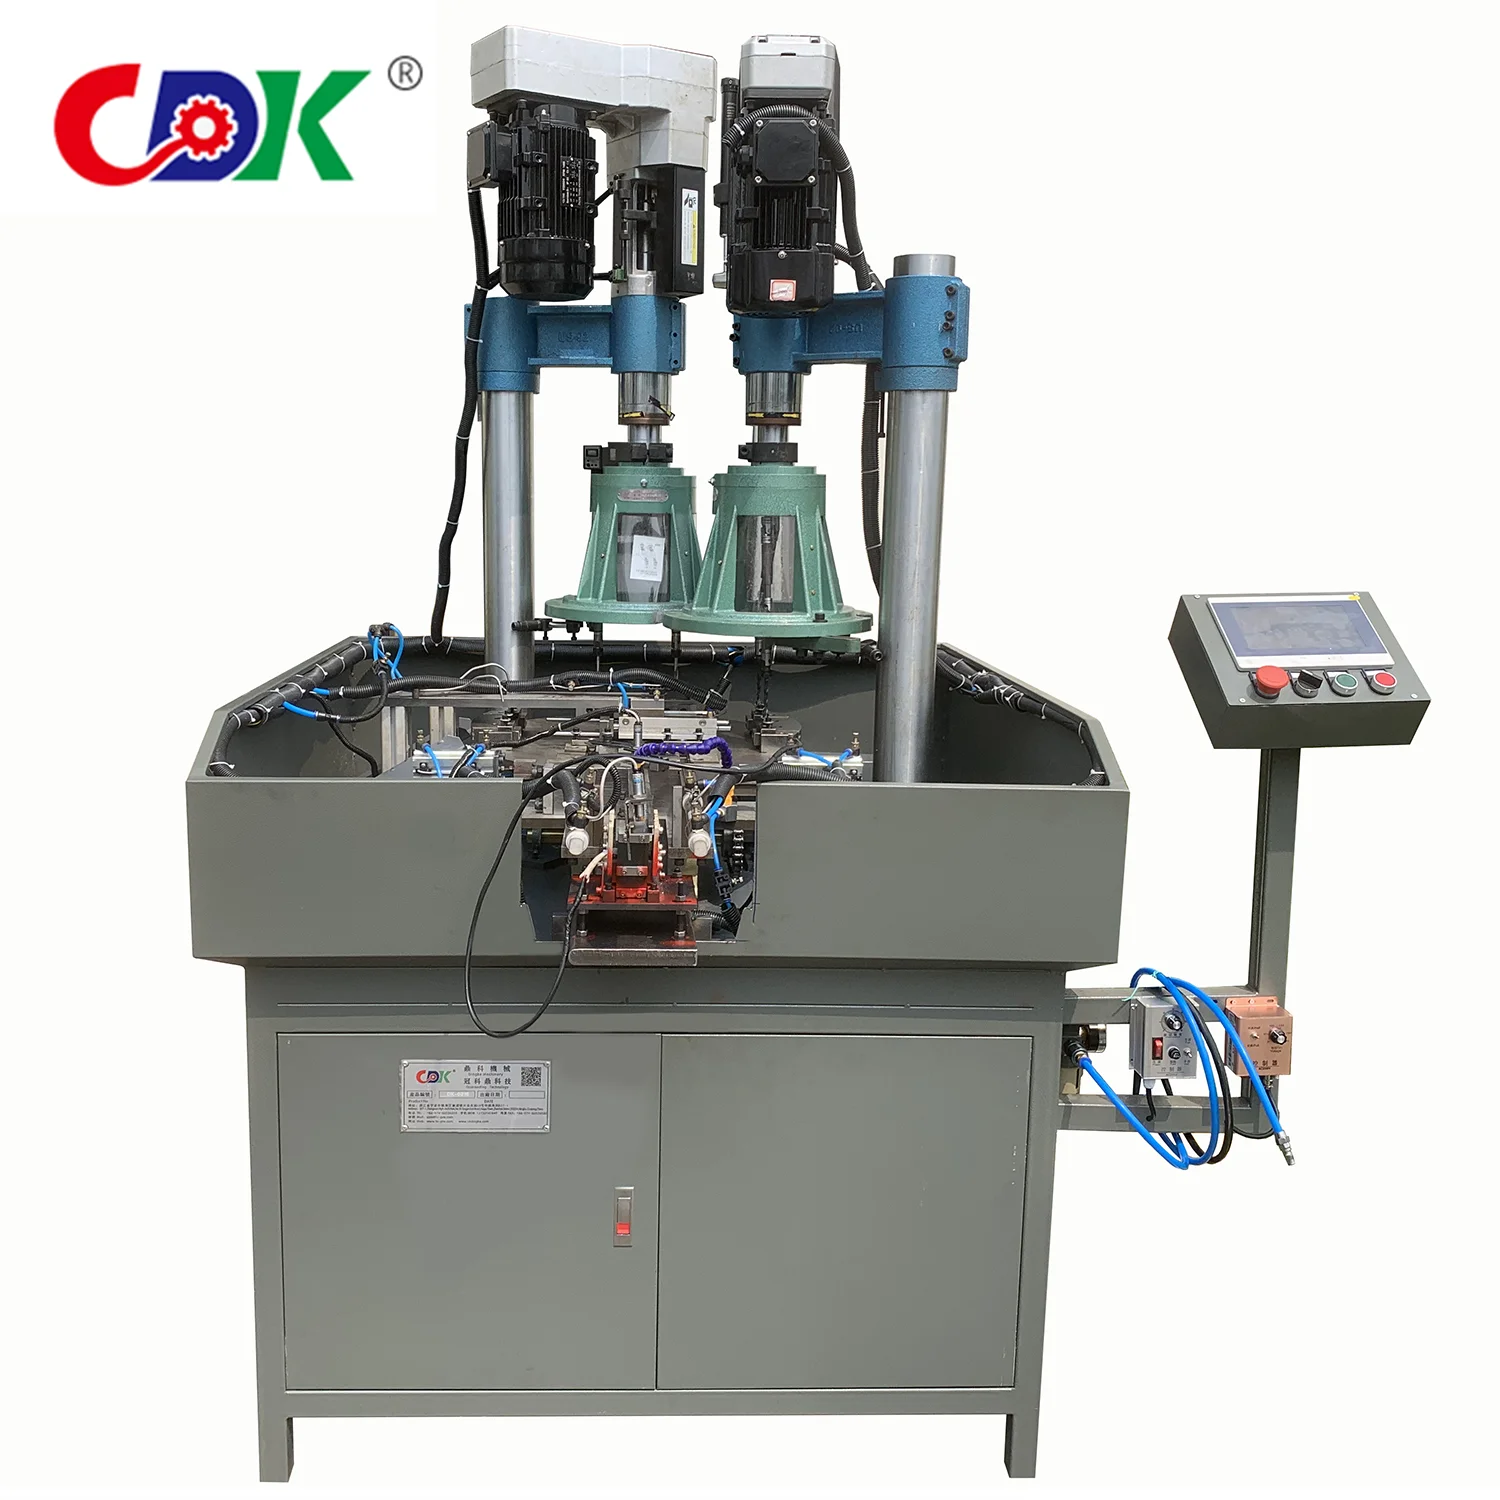 ga winkelen blok Namens Factory Manufacturer Four Station Rotary Table Automatic Drilling Tapping  Machine For Aluminum Square Bar Machine Sizes 380v 1.5 - Buy Automatic  Drilling Tapping Machine,Drilling Tapping Machine,Tapping Machine Product  on Alibaba.com